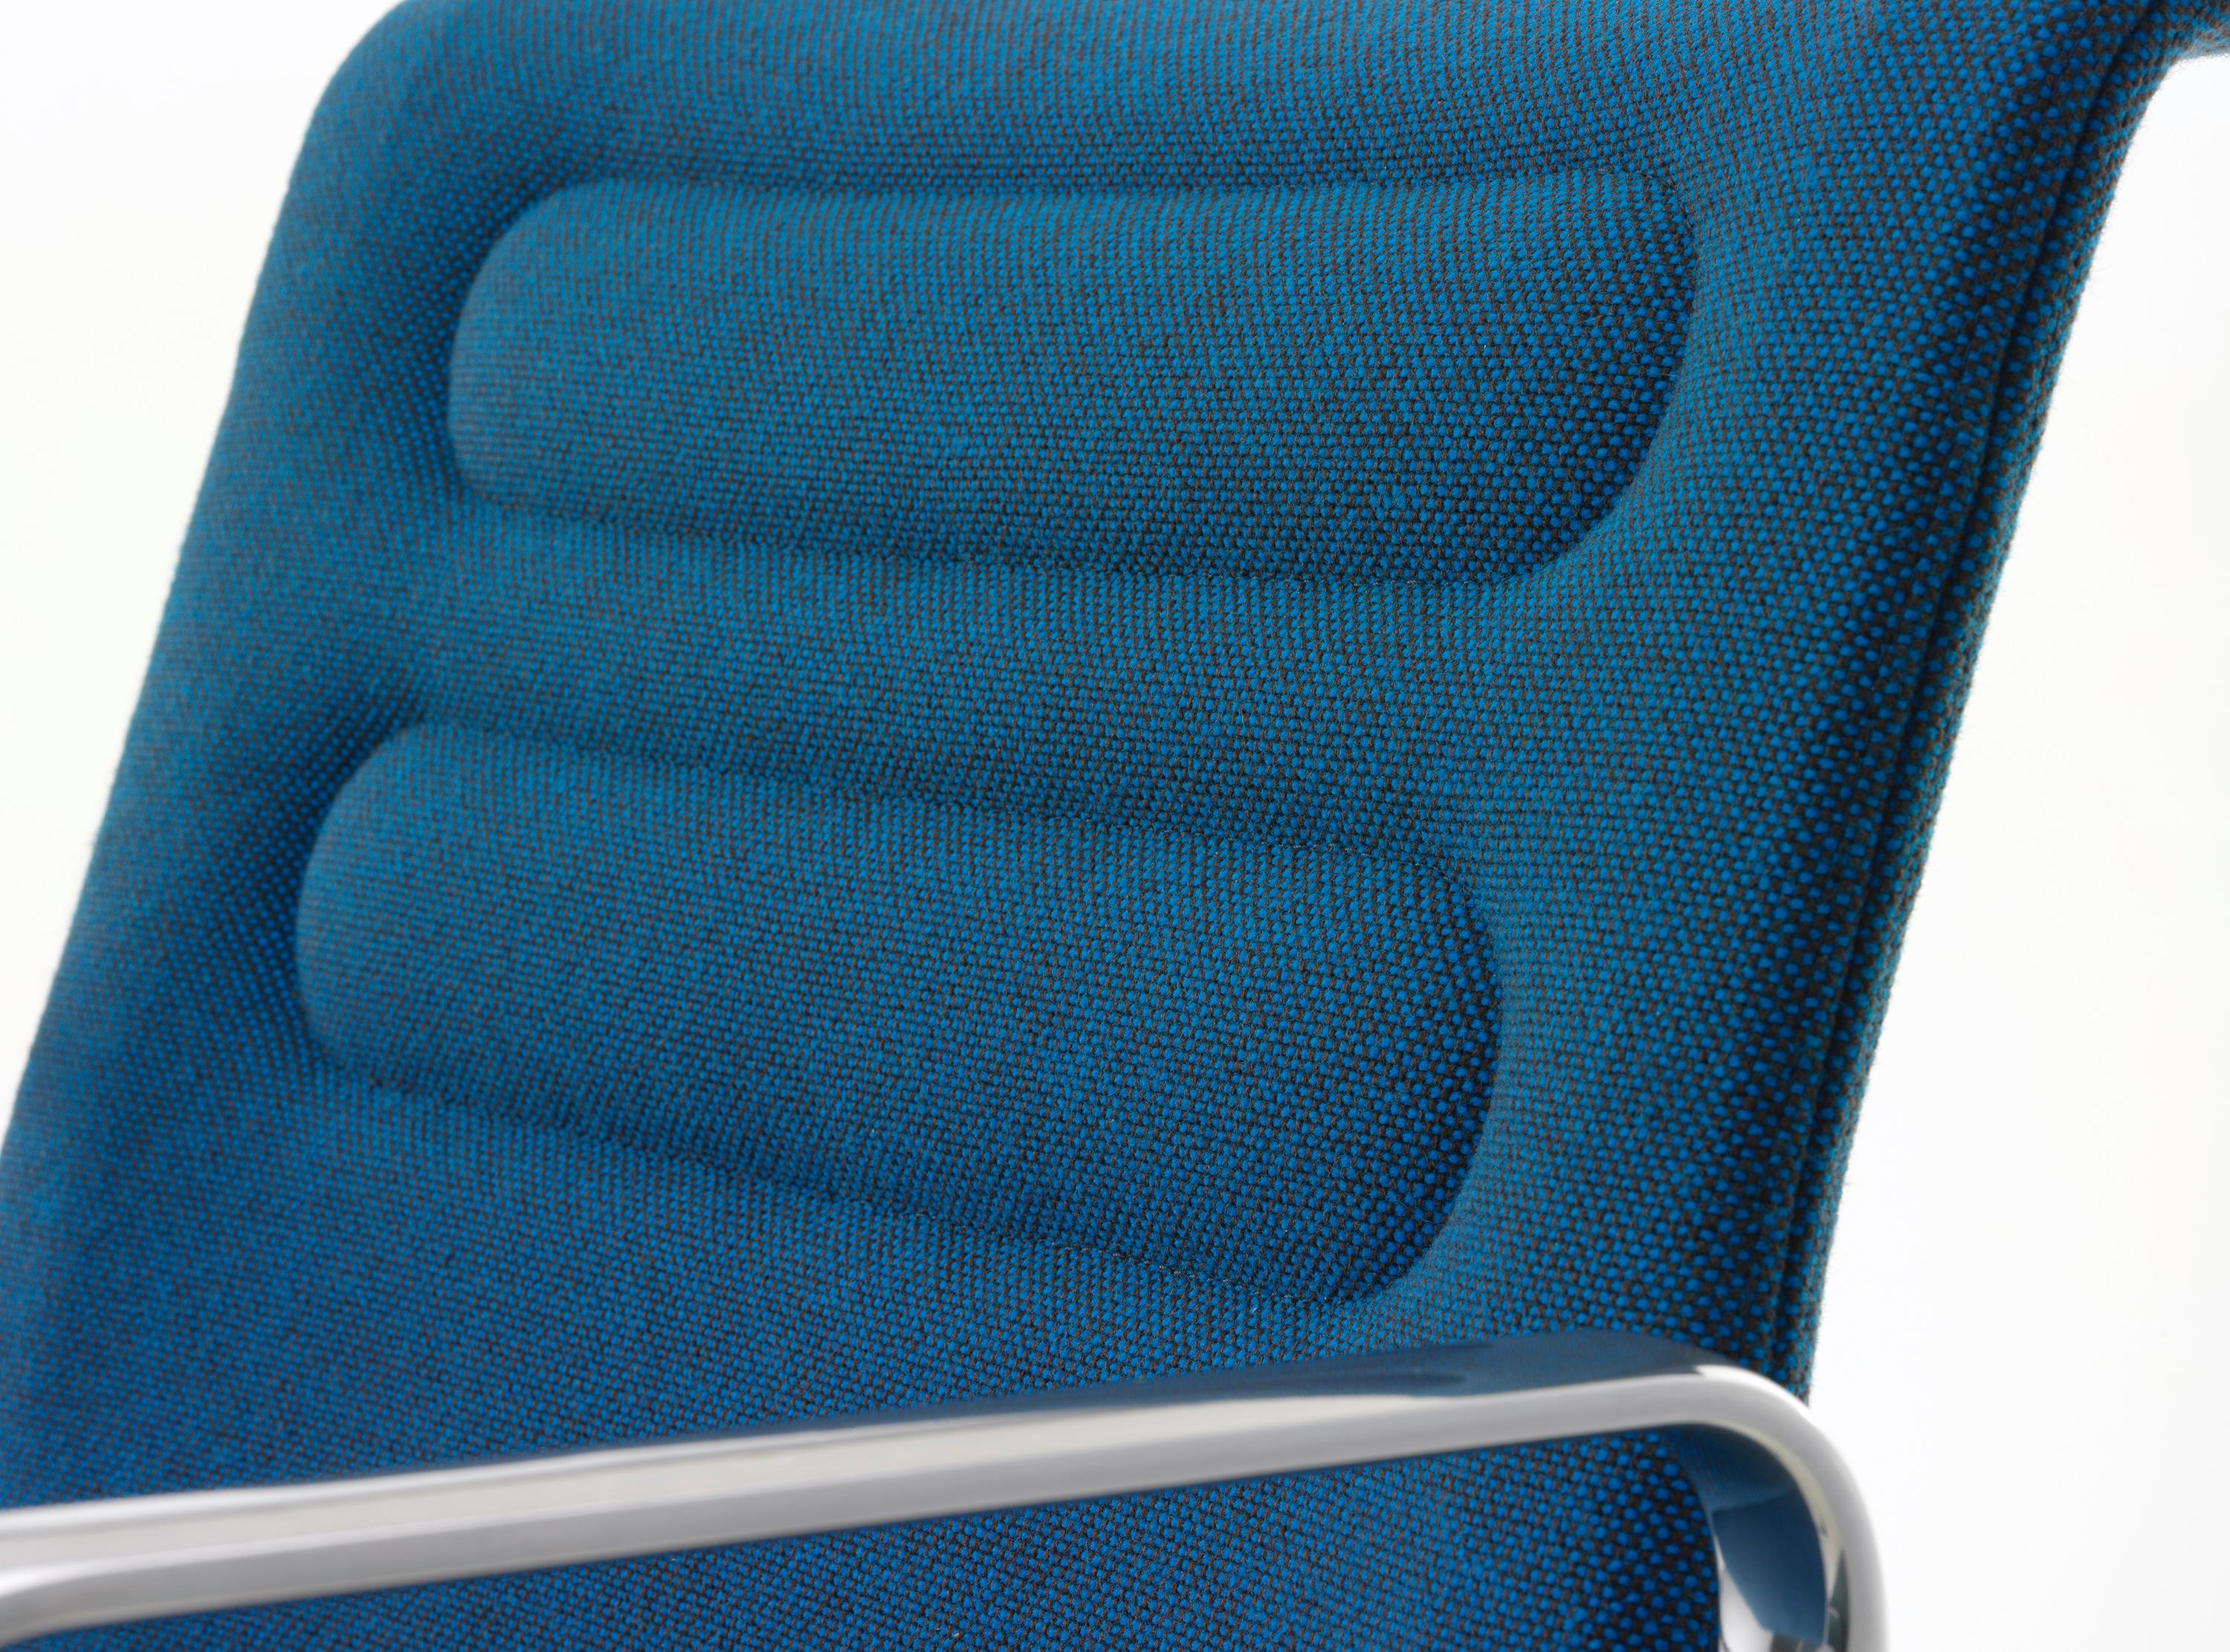 Vitra Ac 5 Meet Chair in Blue & Coconut Plano by Antonio Citterio (Moderne) im Angebot